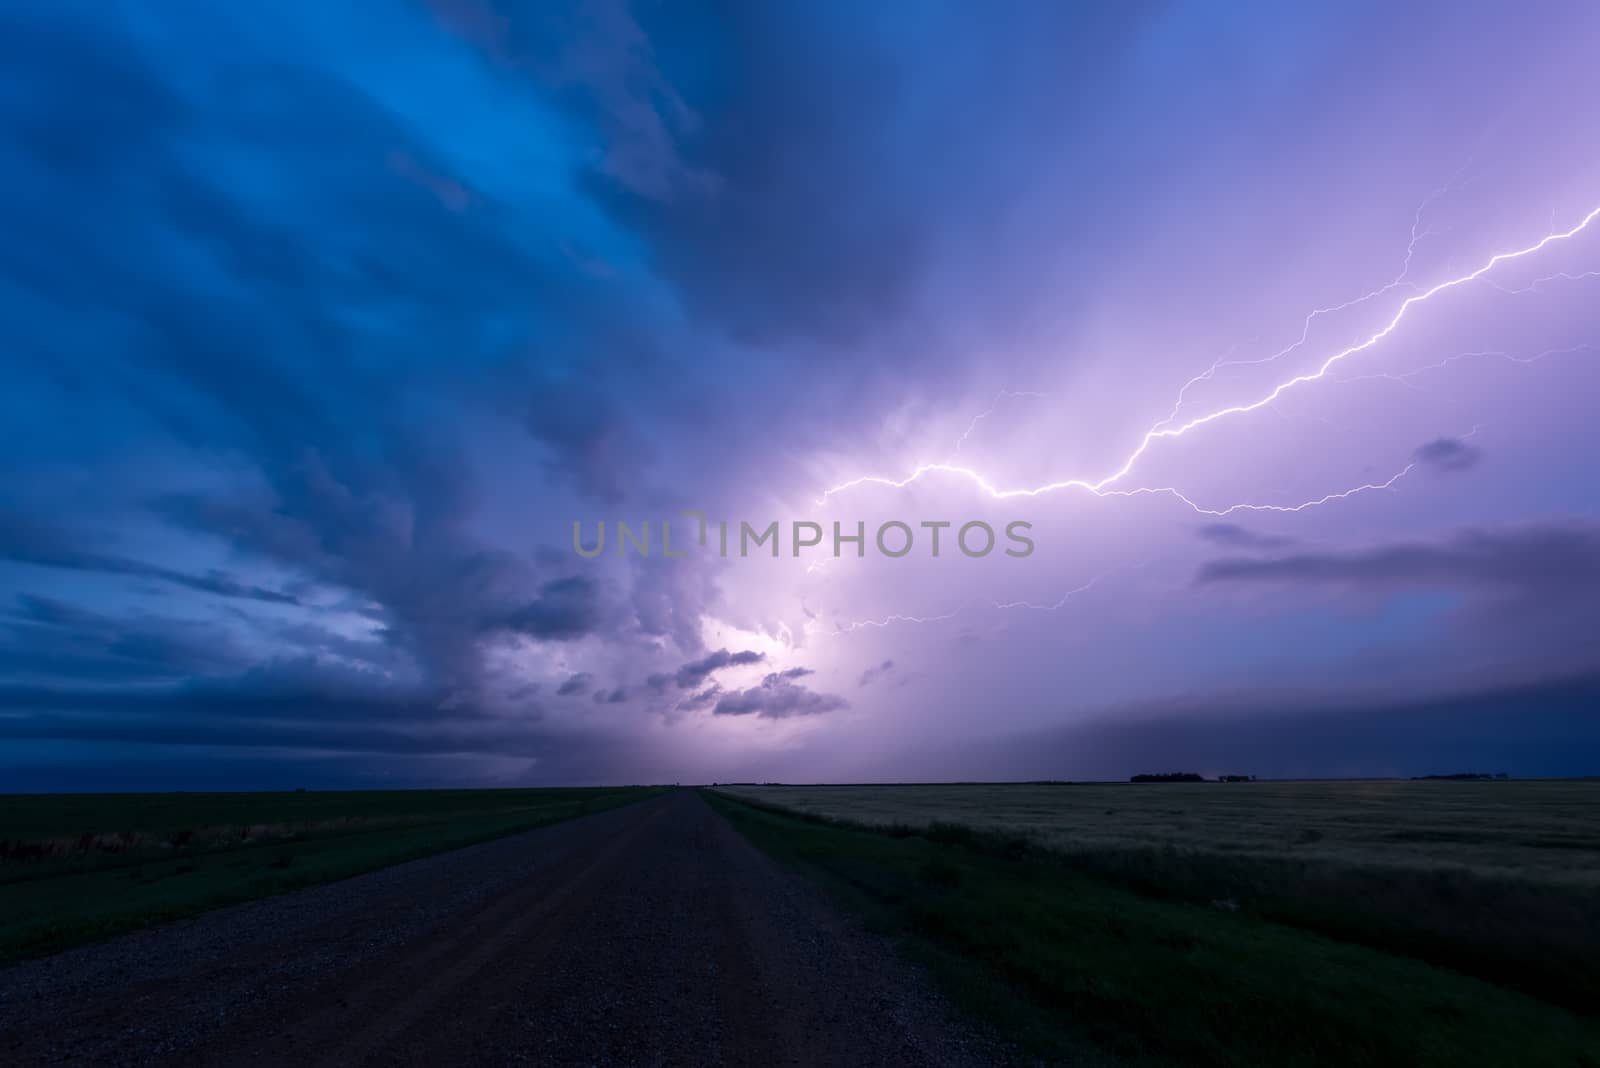 Lightning across the sky above a road in the prairies